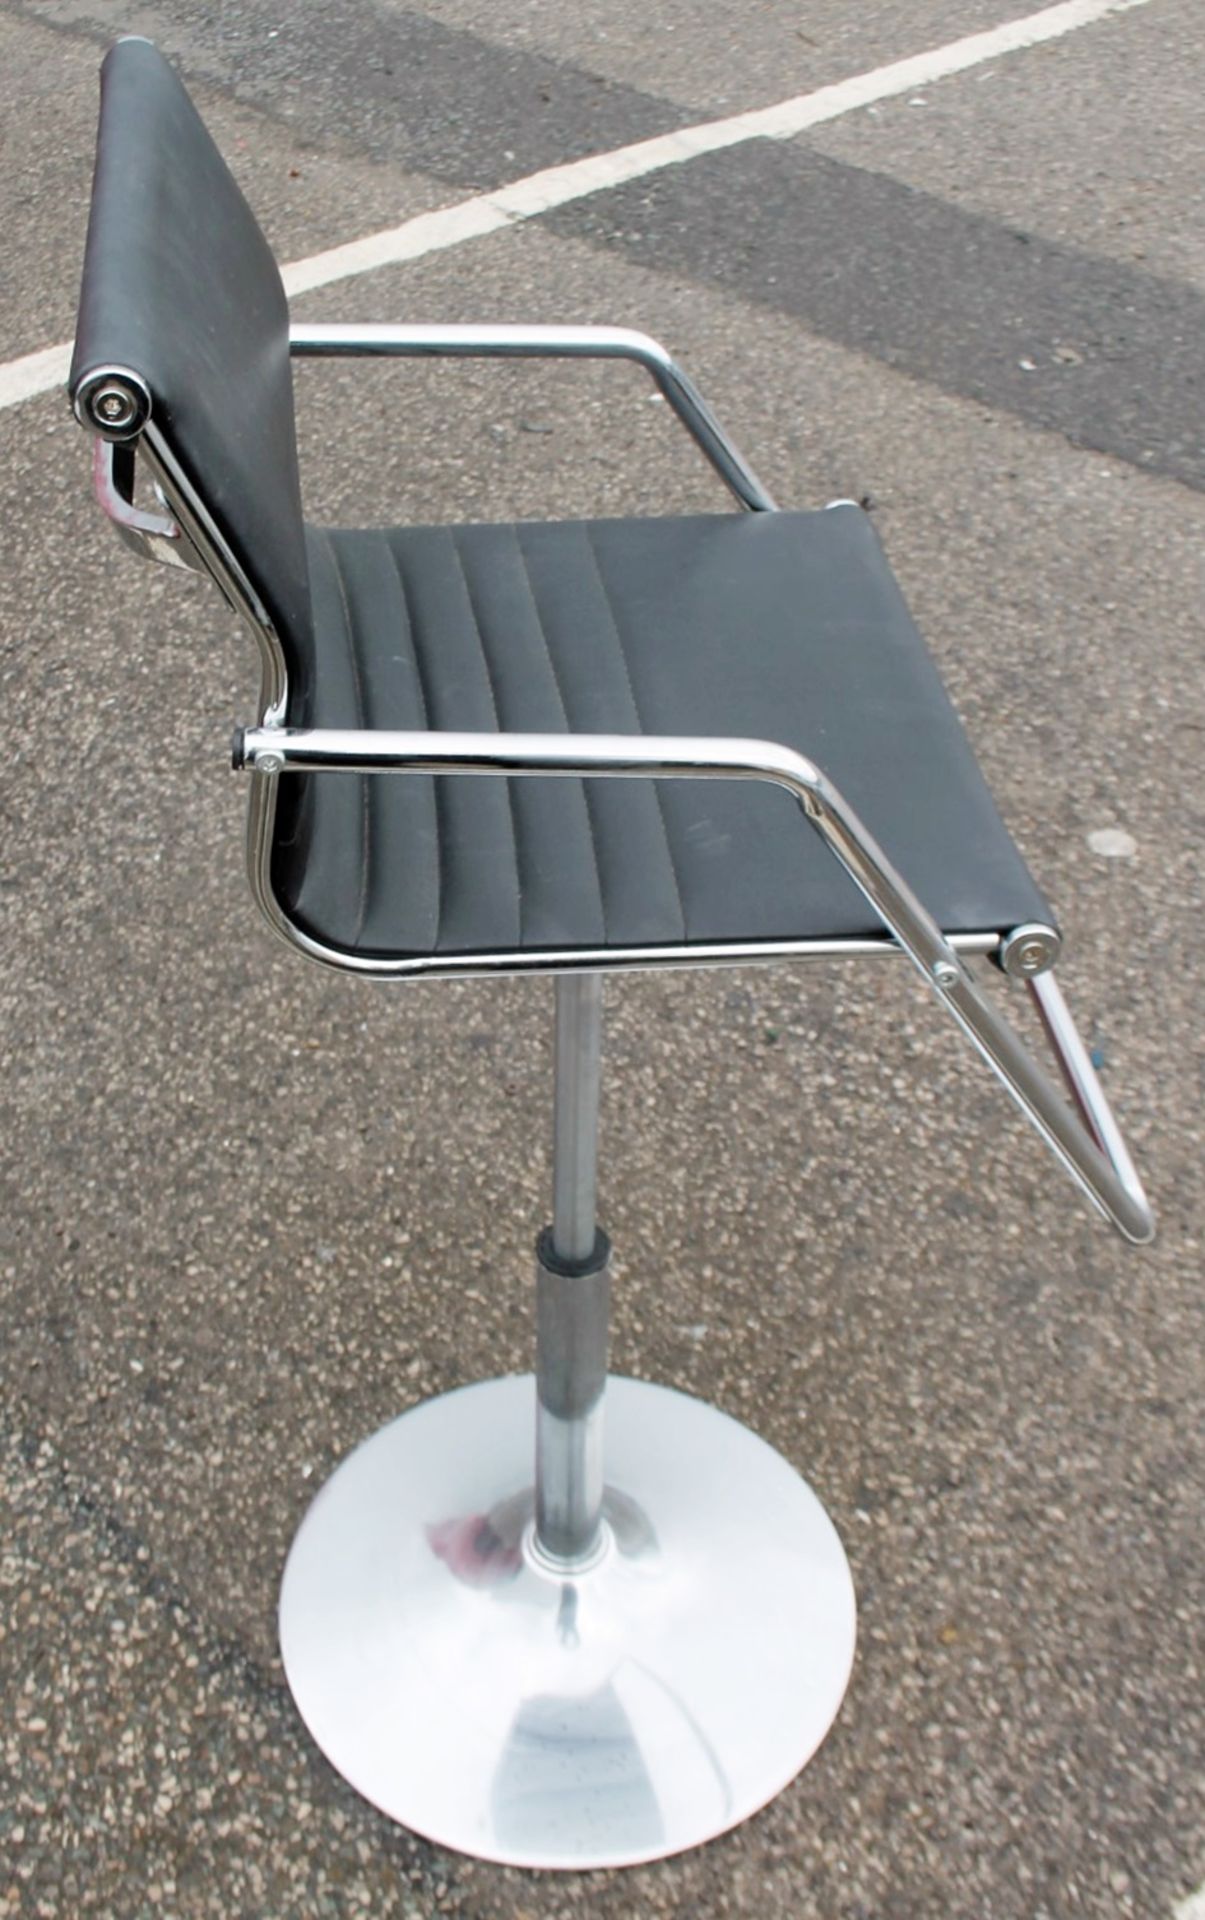 1 x Small Factor / Child's Gas Lift Barbers Chairs - Removed From A Commercial Environment